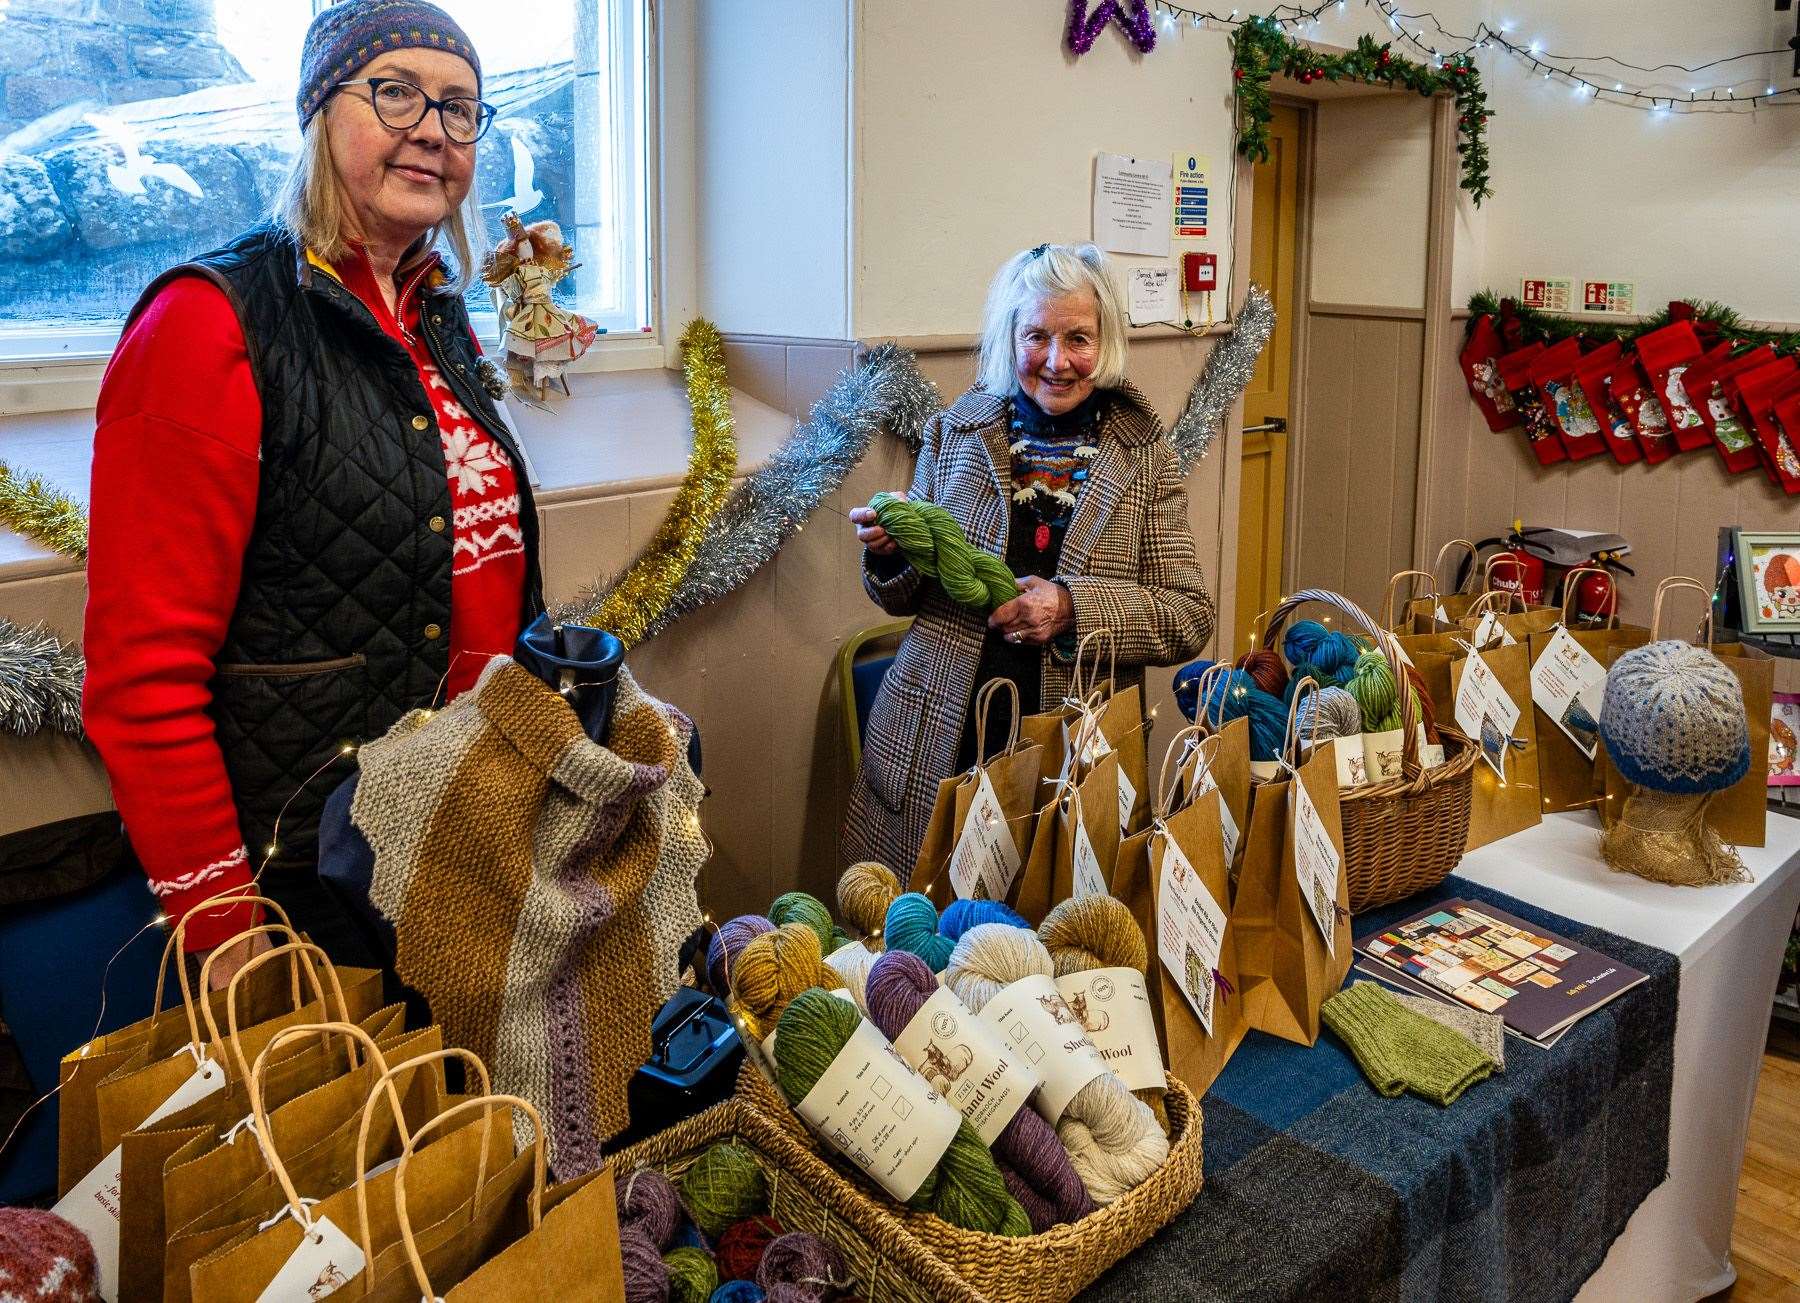 Shetland sheep breeders Jan Charge and Sally Wild, who last year launched Dornoch Fine Shetland Wool, took a stall at the St Andrew's Fair to sell their own yarns. Picture: Andy Kirby